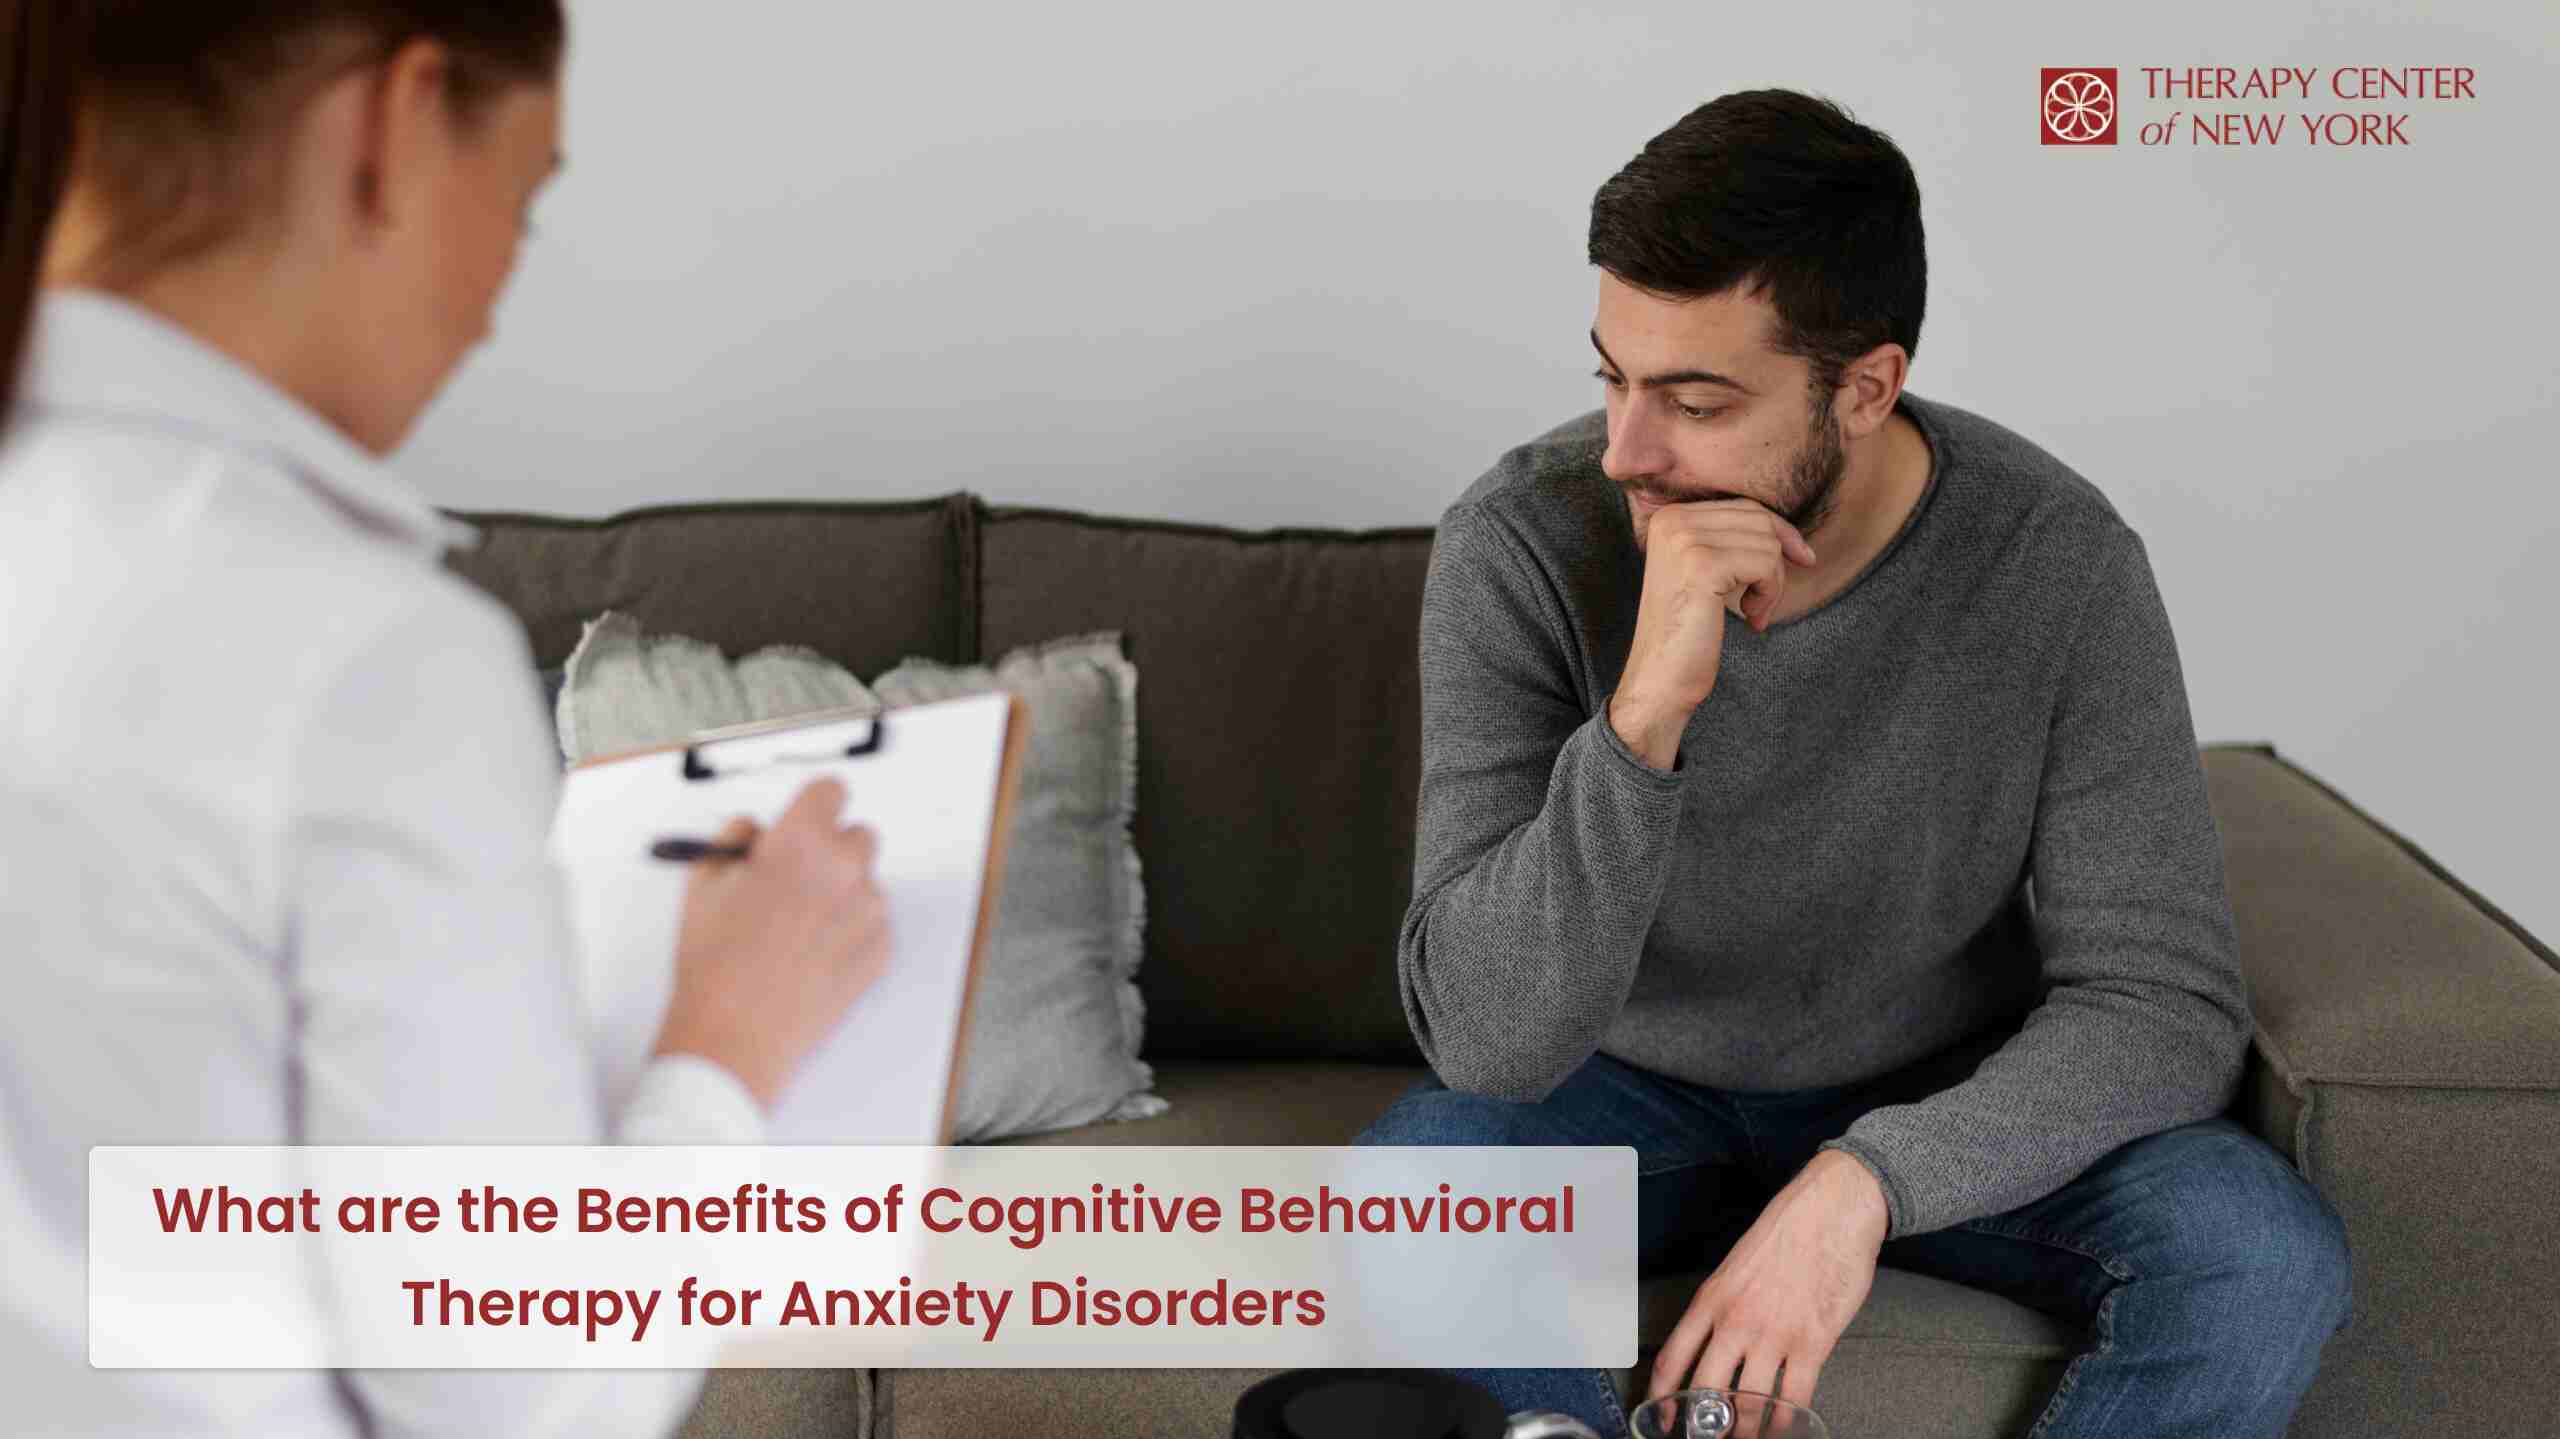 Therapist guiding a patient through Cognitive Behavioral Therapy for anxiety.